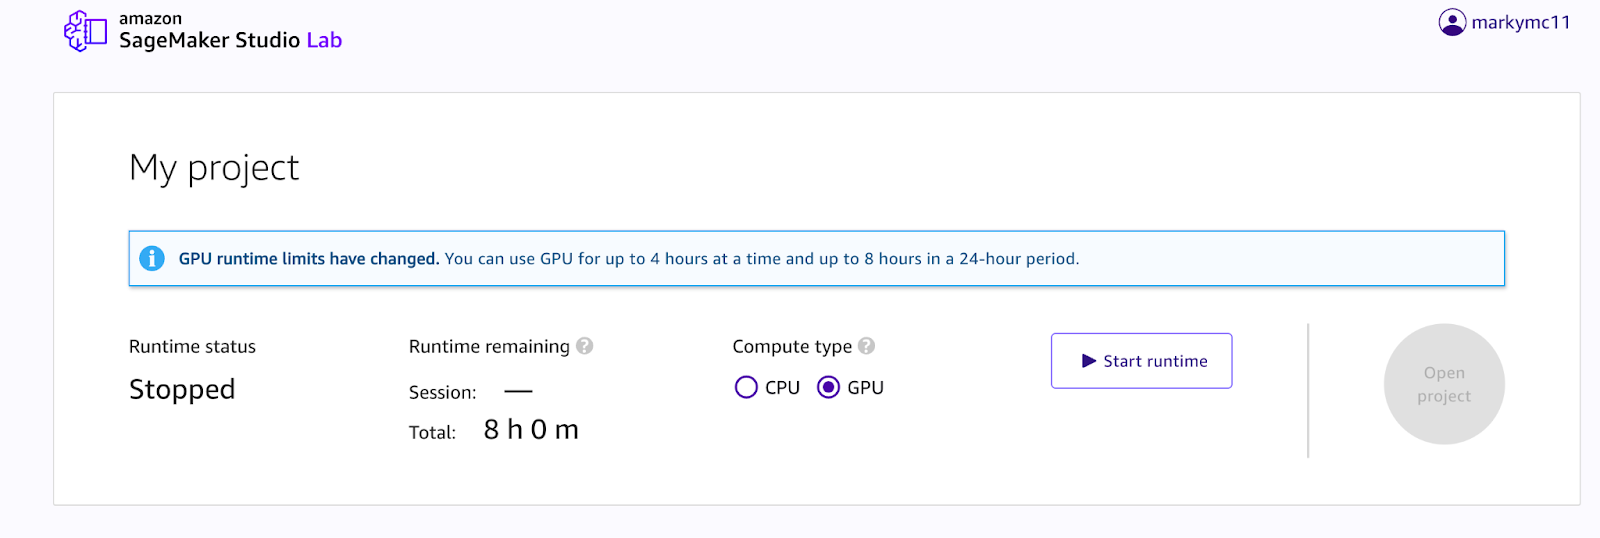 A “my project” tab on SageMaker Studio Lab showing information about runtime status, runtime remaining, and compute type.